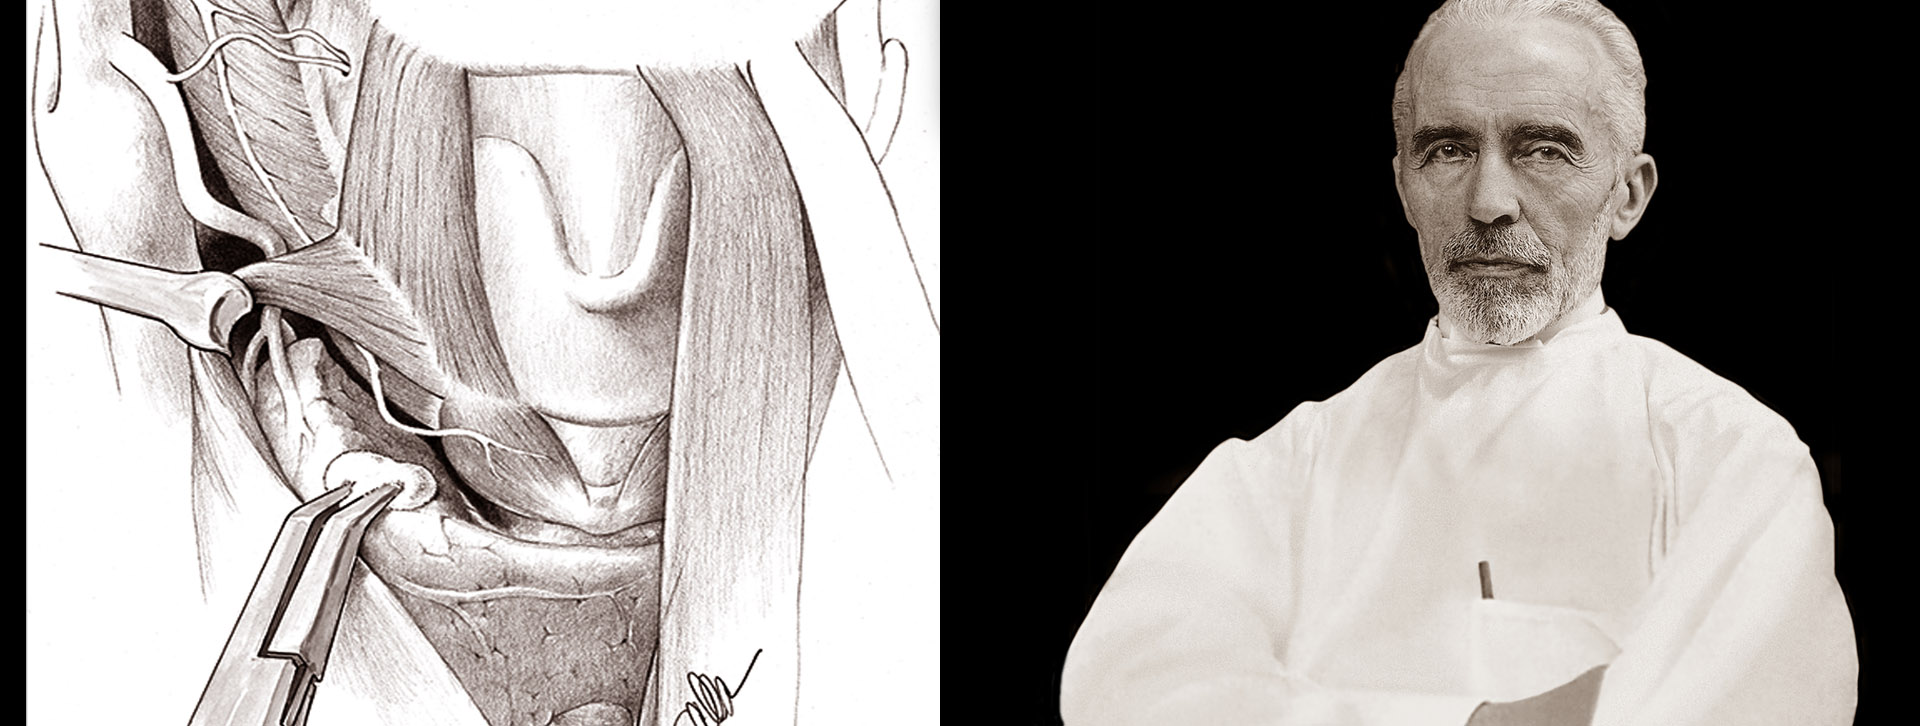 Black and white image of thyroid anatomy on the left and Dr. Kocher on the right.